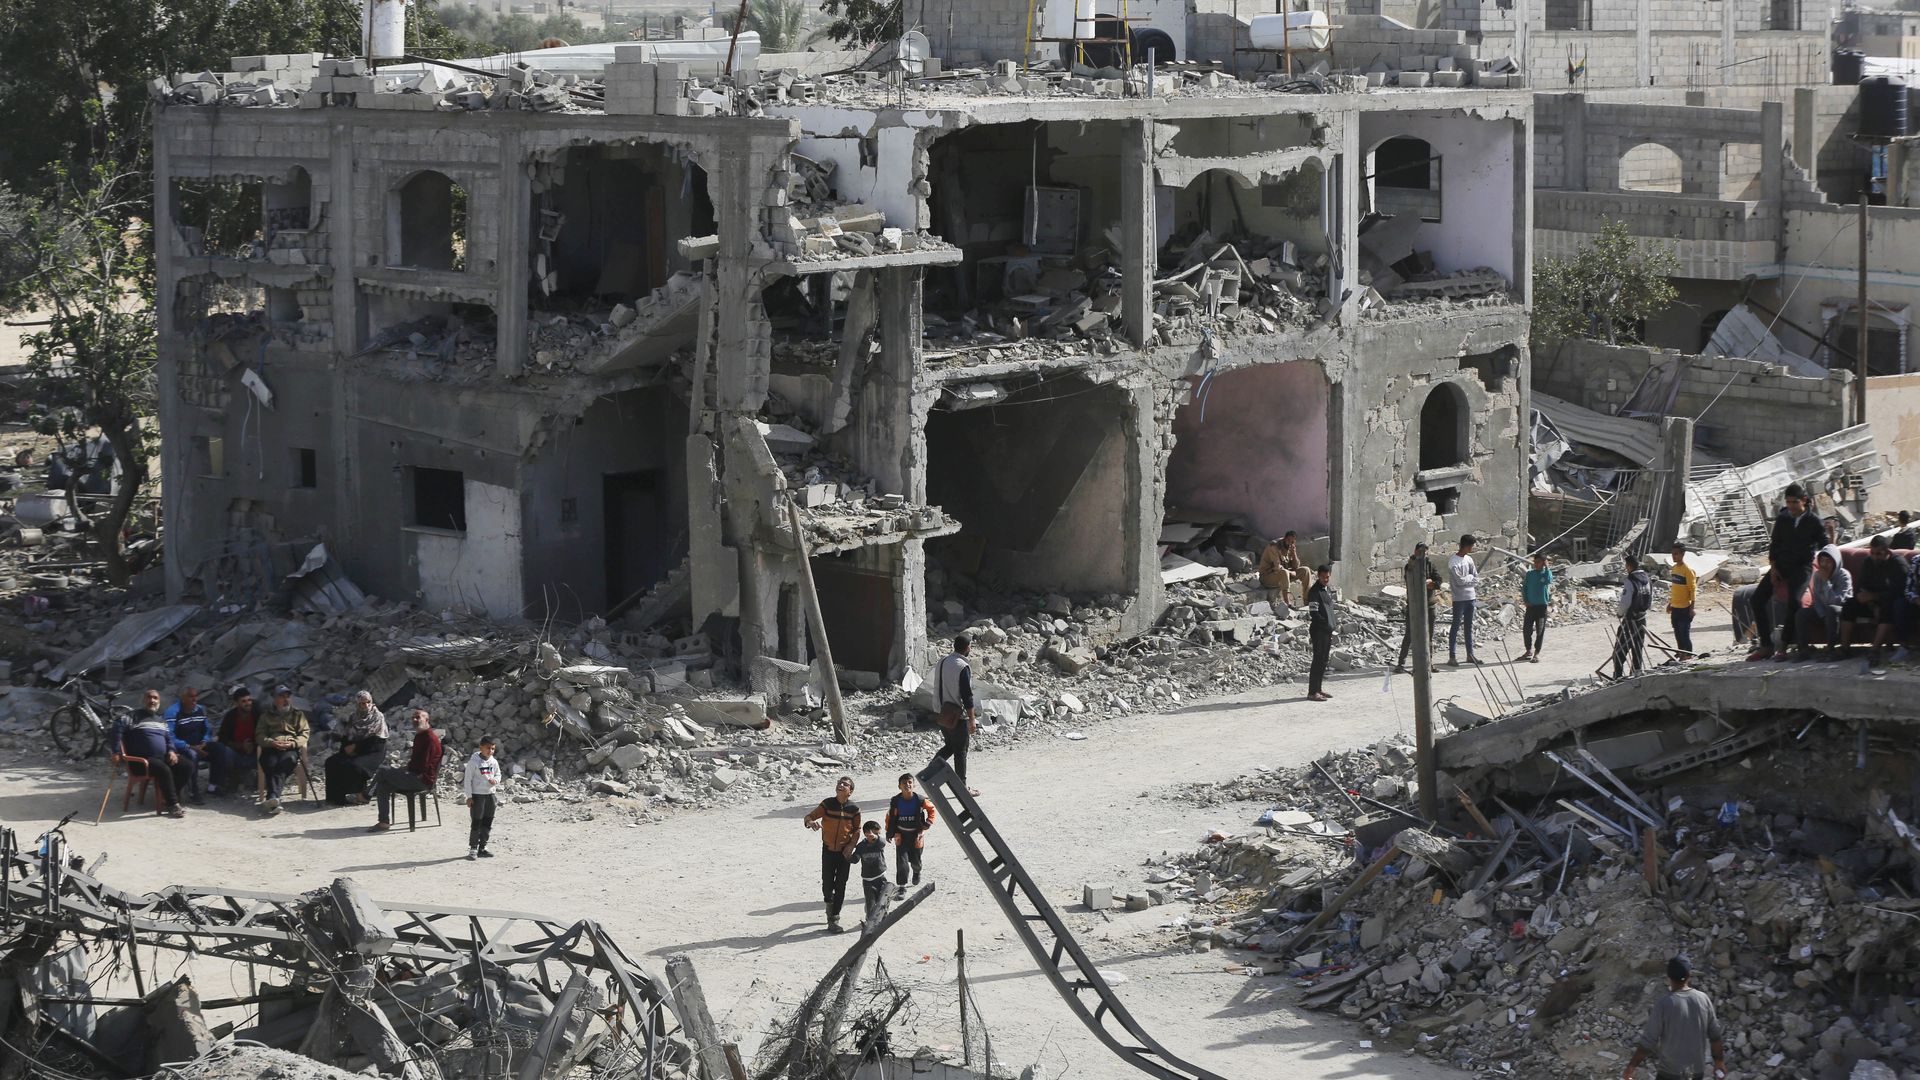 Palestinians in Khan Yunis walk in residential areas destroyed in Israel's bombardment of Gaza.